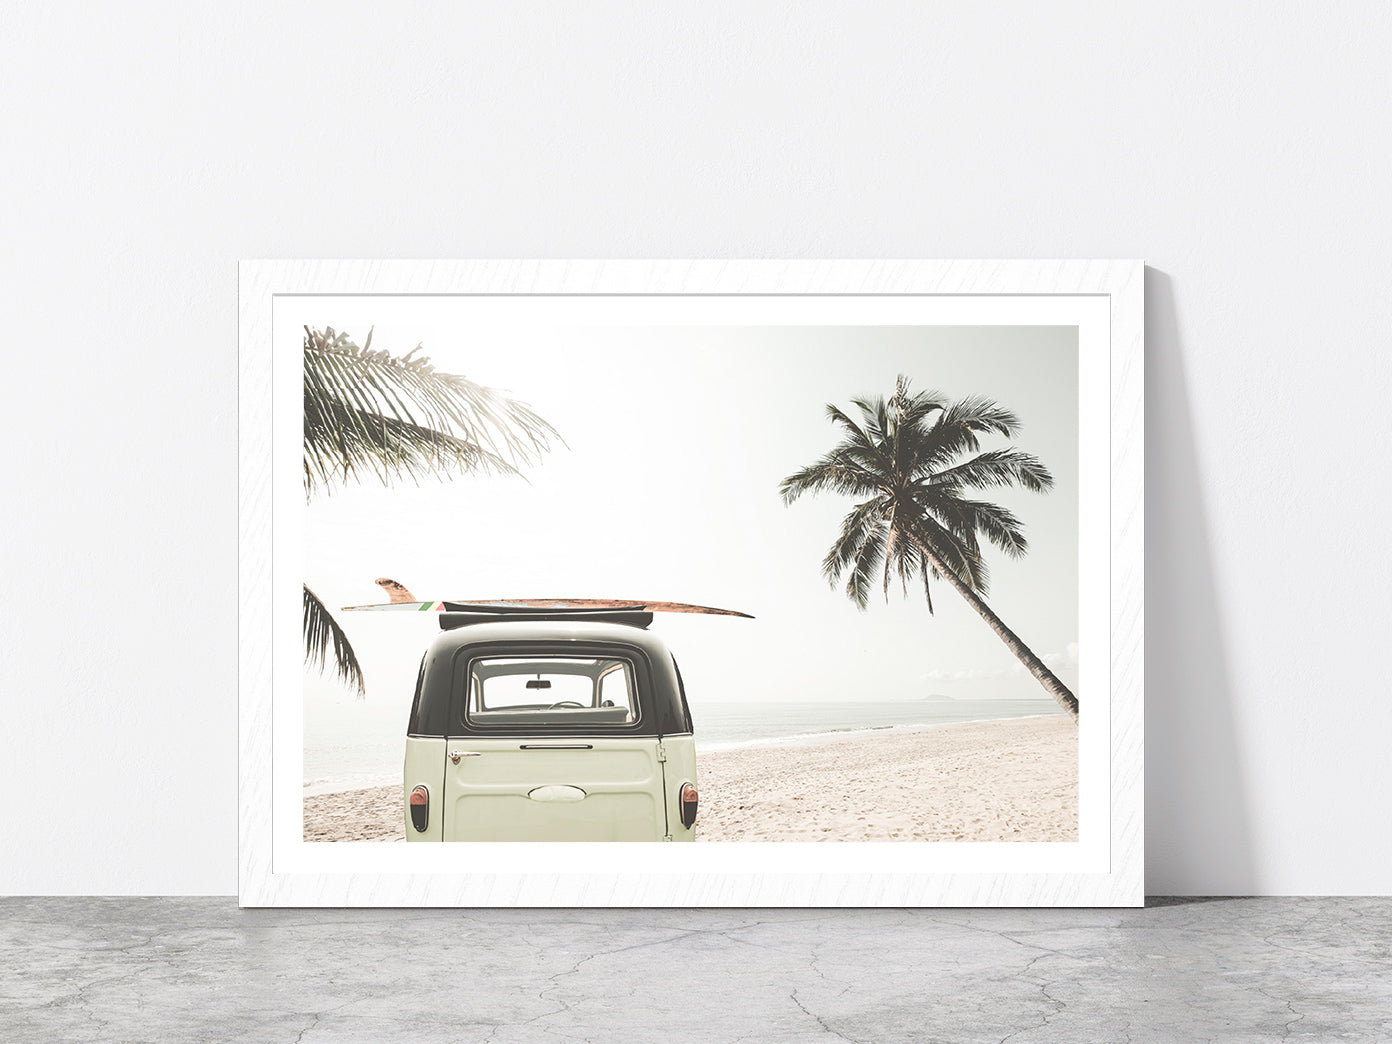 Surf Board on Vintage Van & Palm Tree near Sea Glass Framed Wall Art, Ready to Hang Quality Print With White Border White